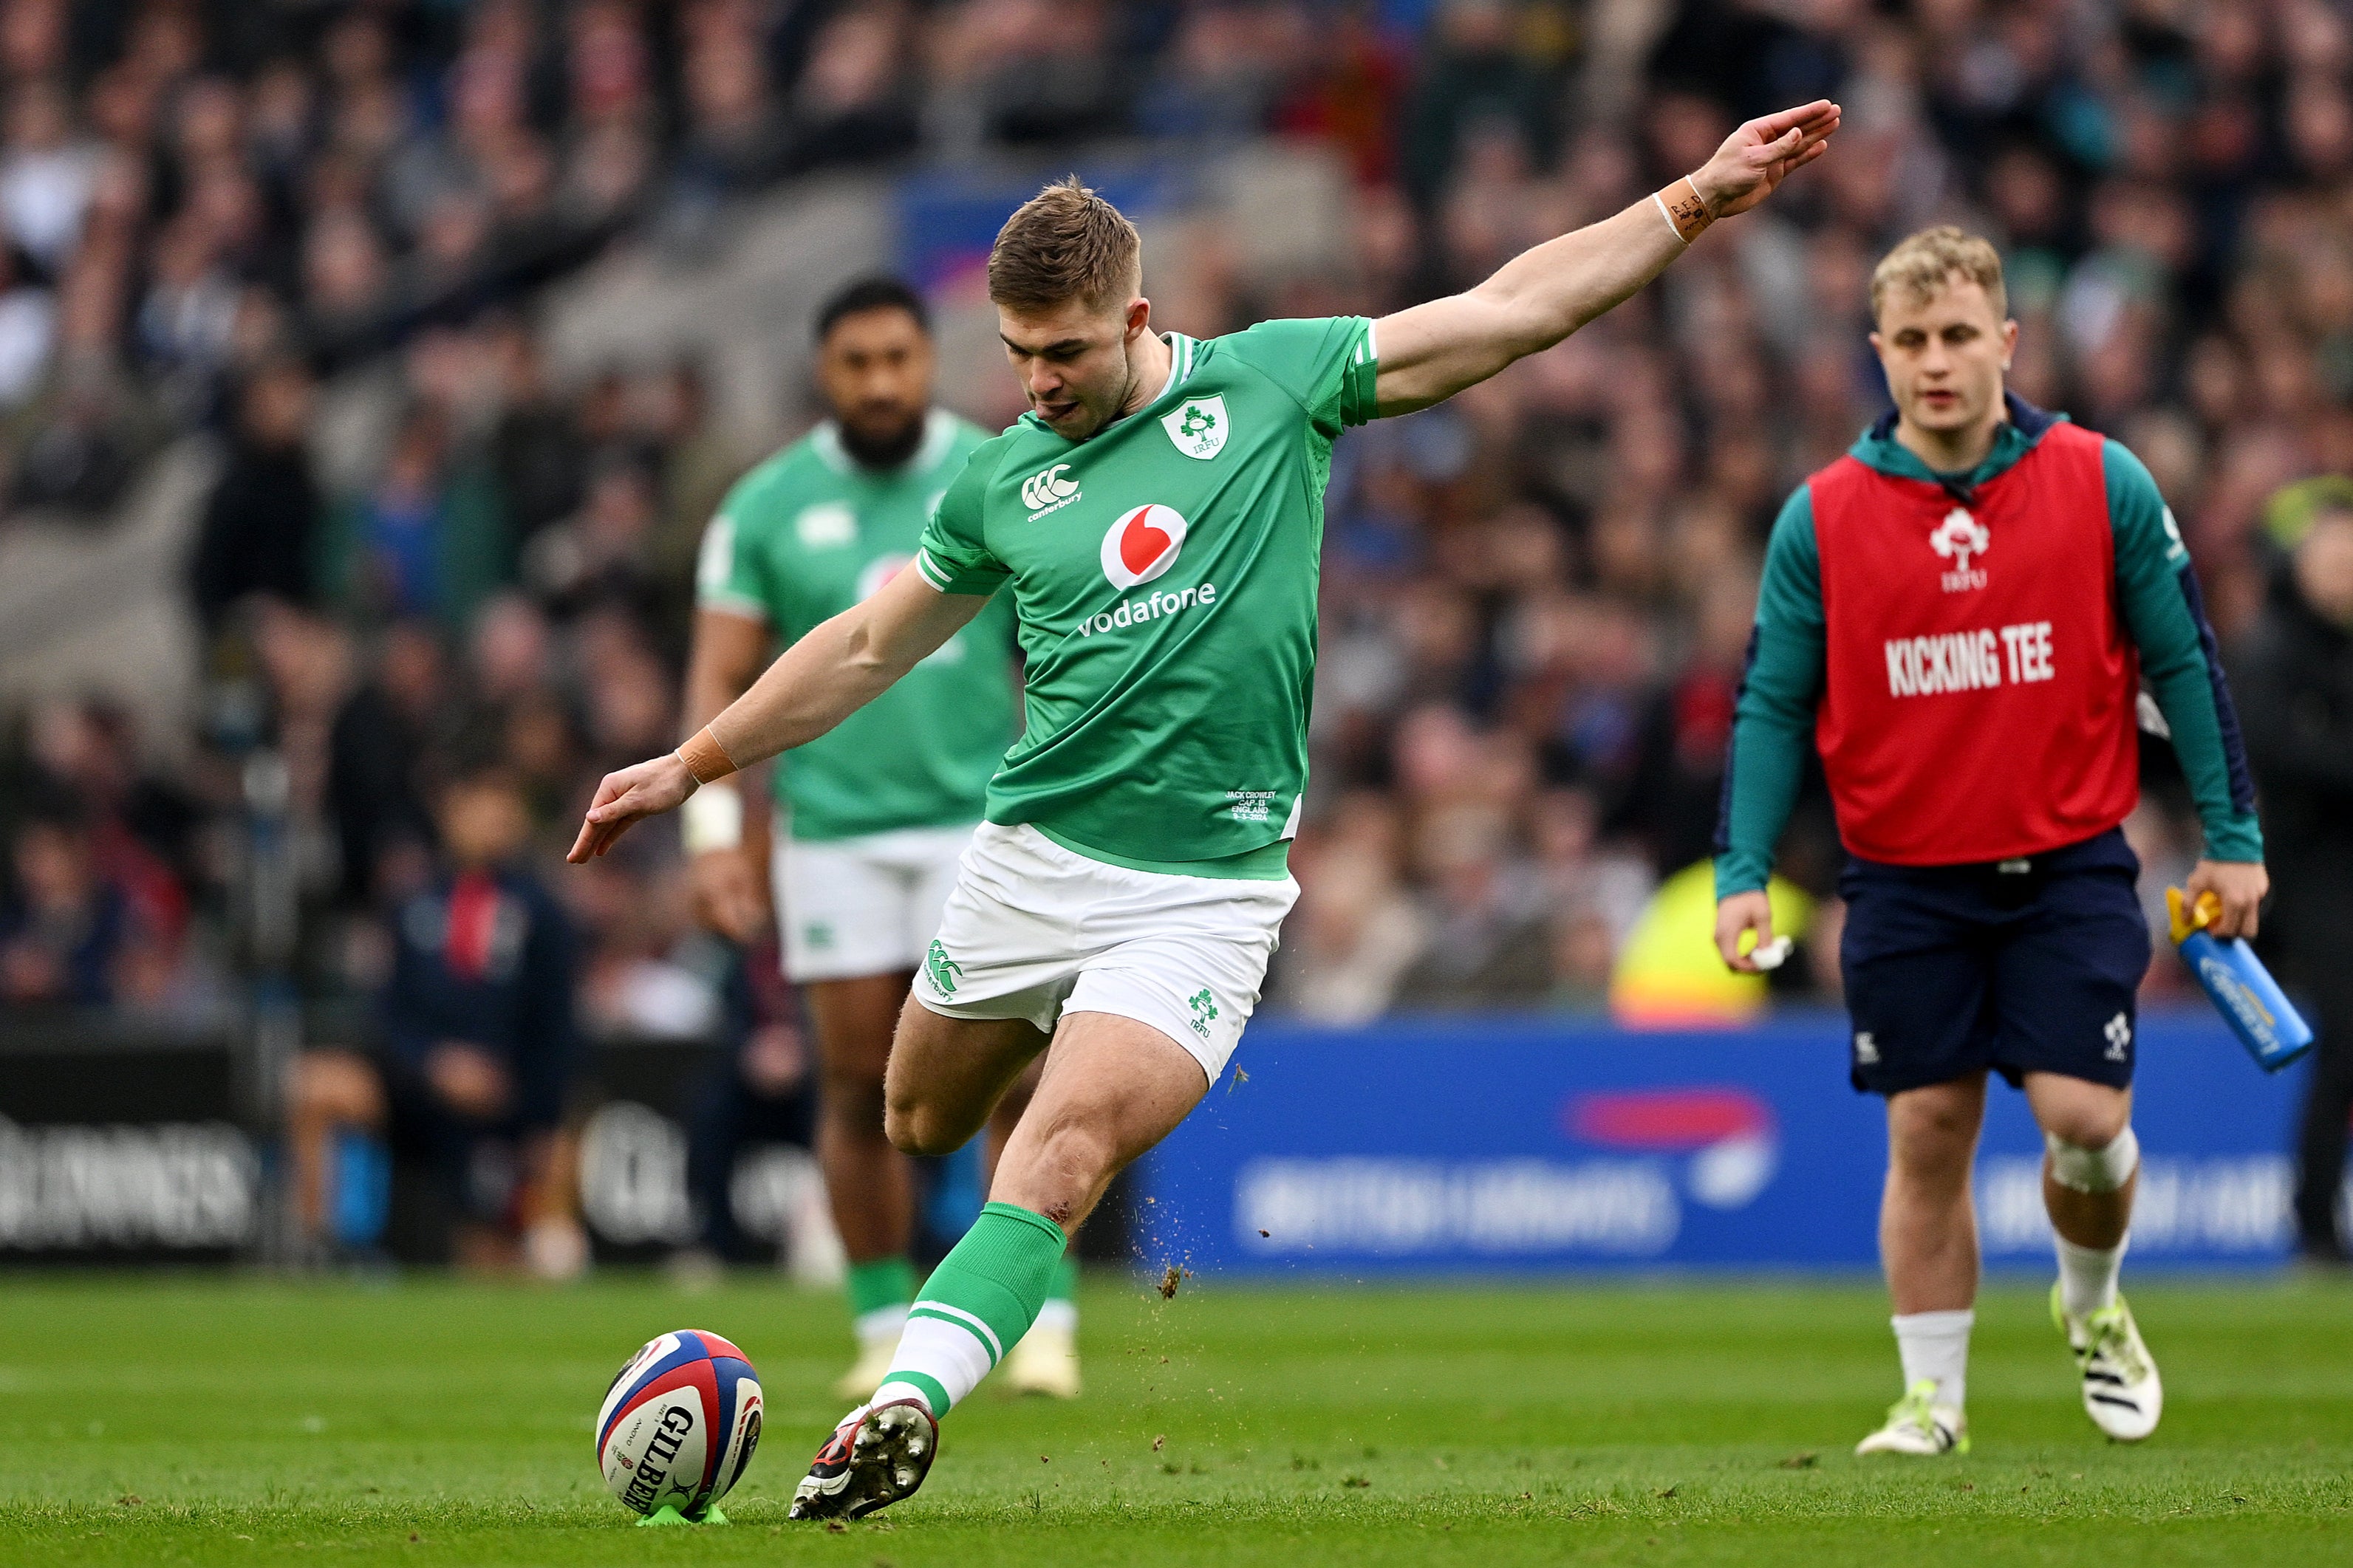 Ireland edged in front through Jack Crowley’s boot